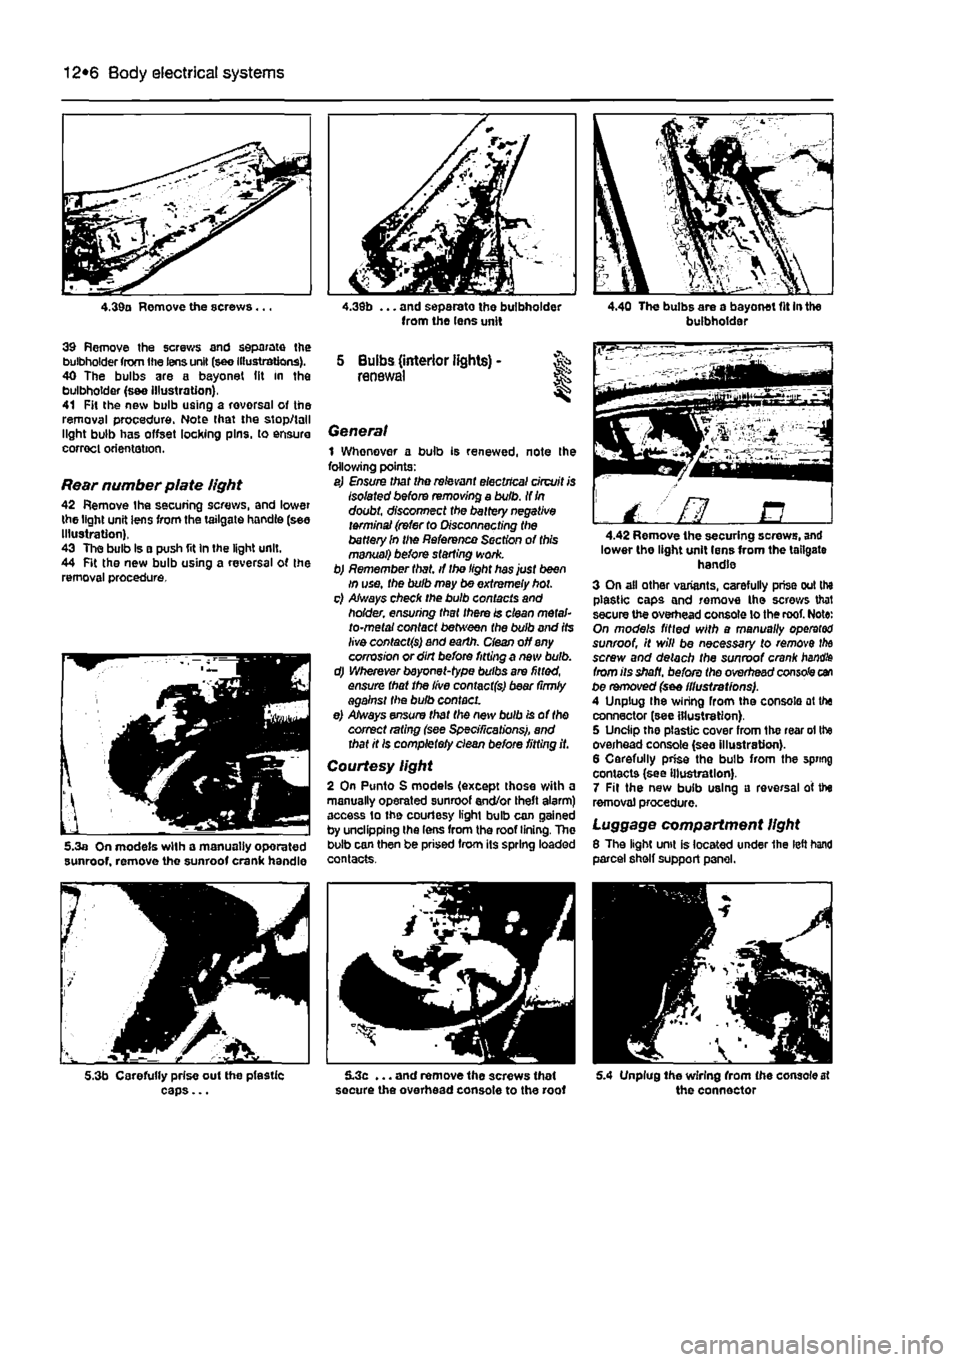 FIAT PUNTO 1994 176 / 1.G Workshop Manual 
12*6 Body electrical systems 
4.39a Remove the screws... 
39 Remove the screws and separate the bulbholder from the lens unit (see Illustrations). 40 The bulbs are a bayonet (it in the bulbholder (s&